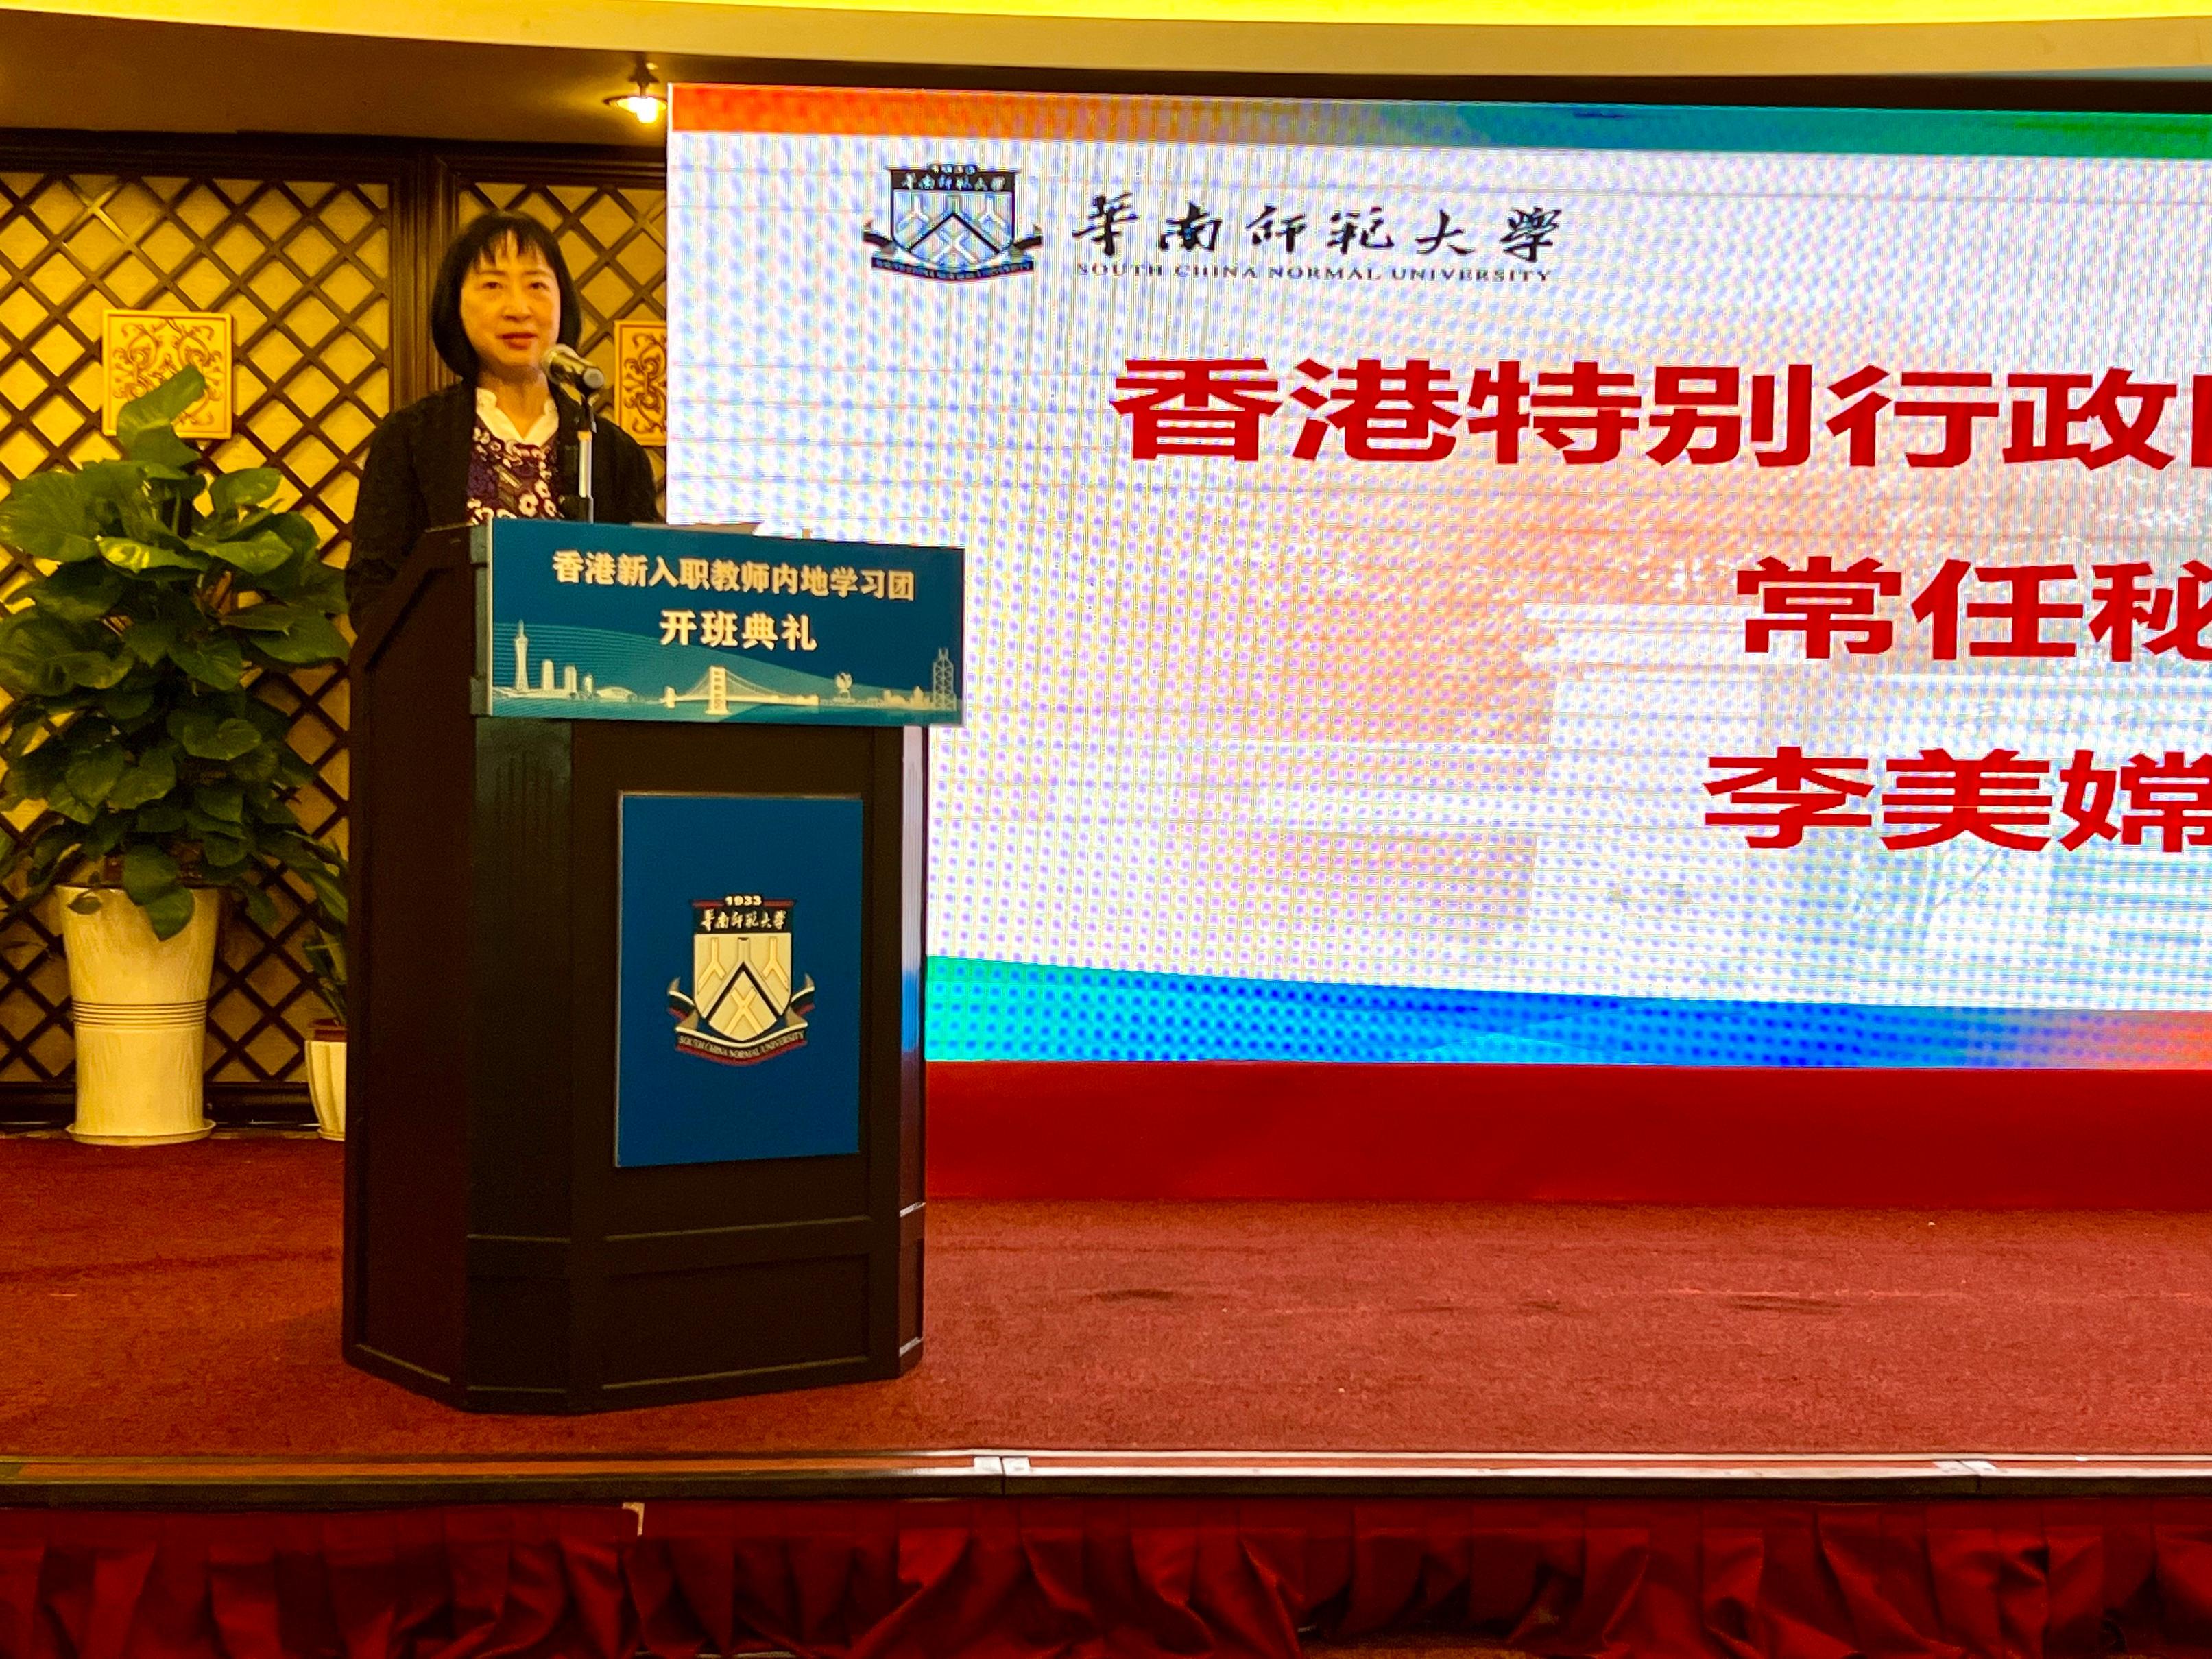 The Permanent Secretary for Education, Ms Michelle Li, today (April 11) attended the launch ceremony of the first Mainland study tour for newly-joined teachers at South China Normal University in Guangzhou. Photo shows Ms Li speaking at the ceremony.